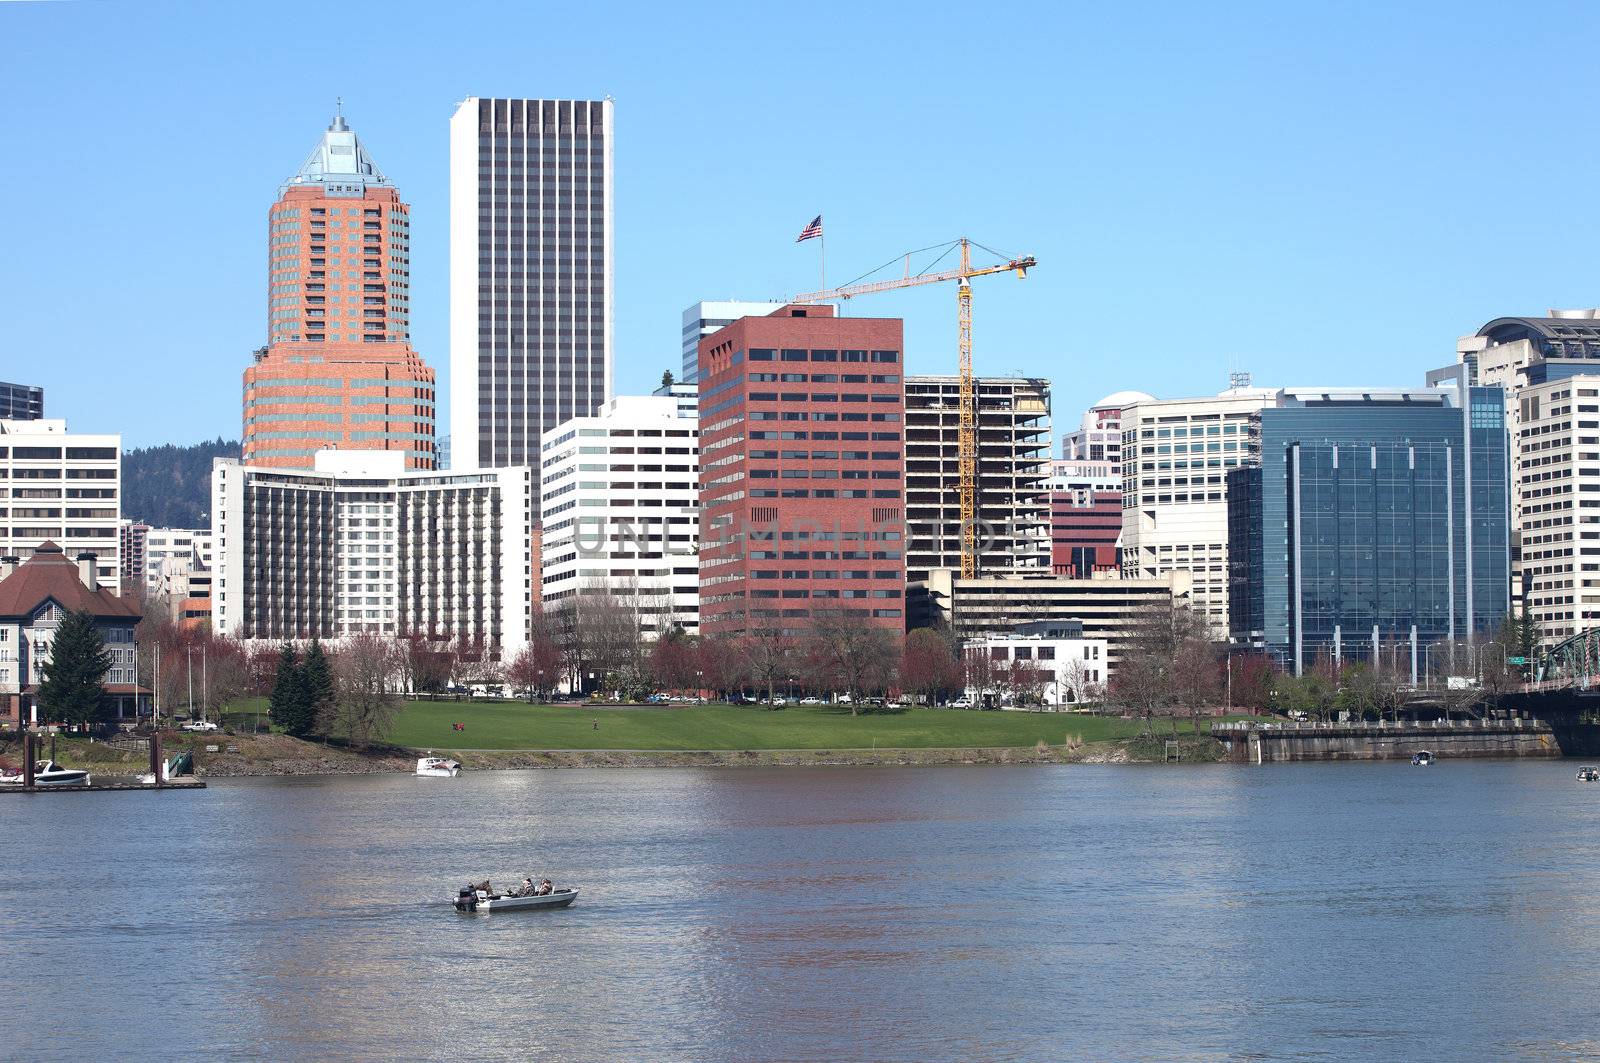 Fishing boats roam the downtown river in Portland Oregon on the first day of spring.